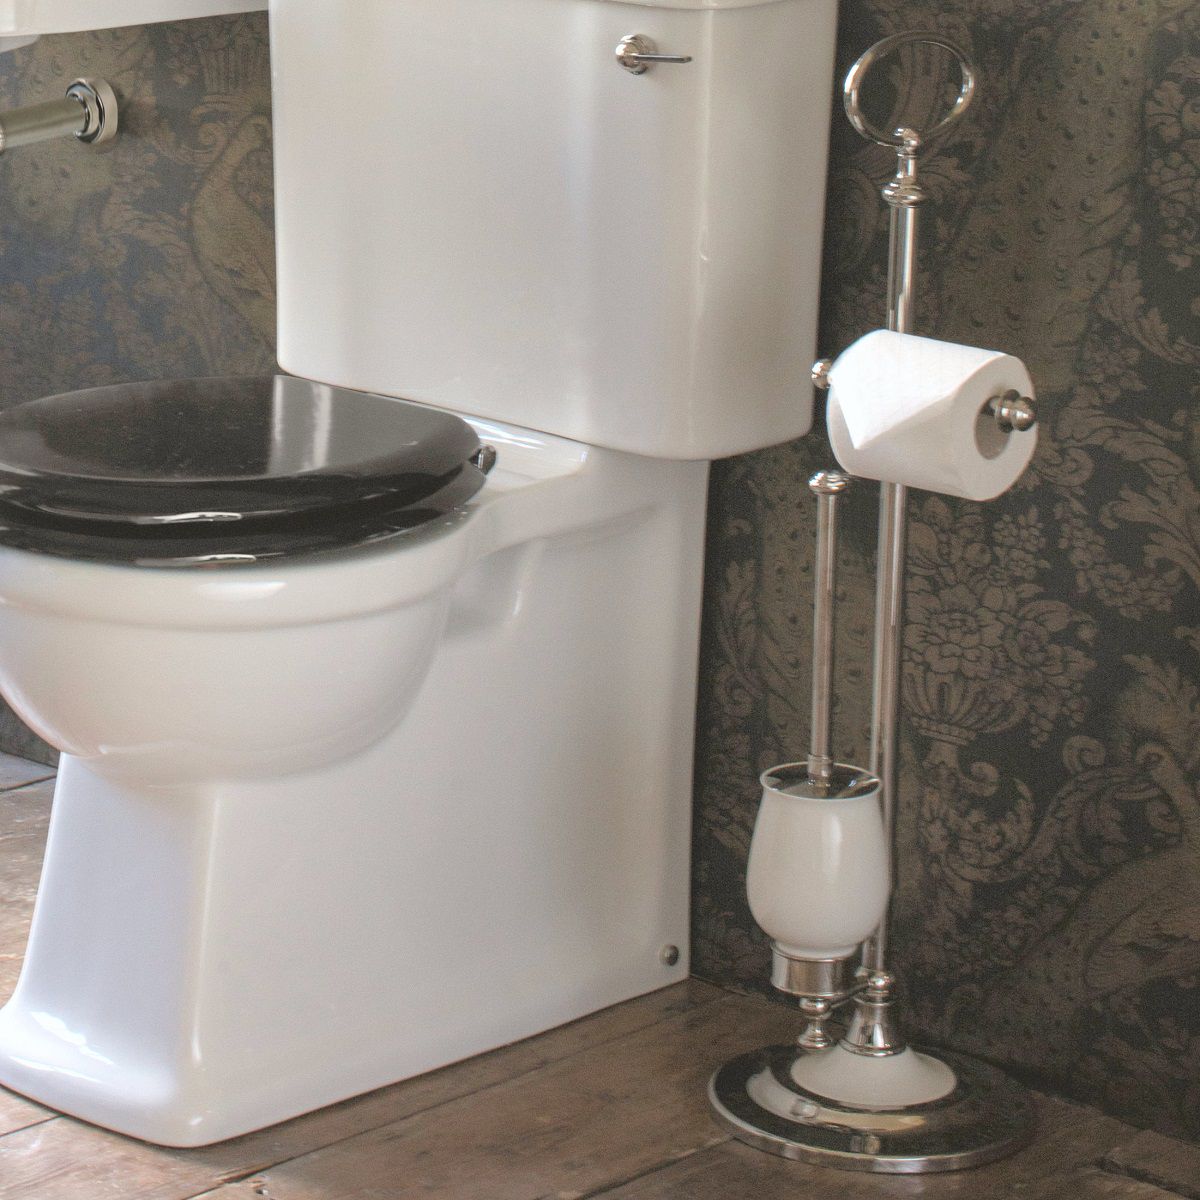 Modern Toilet Roll Holder Freestanding - Make a quirky yet functional